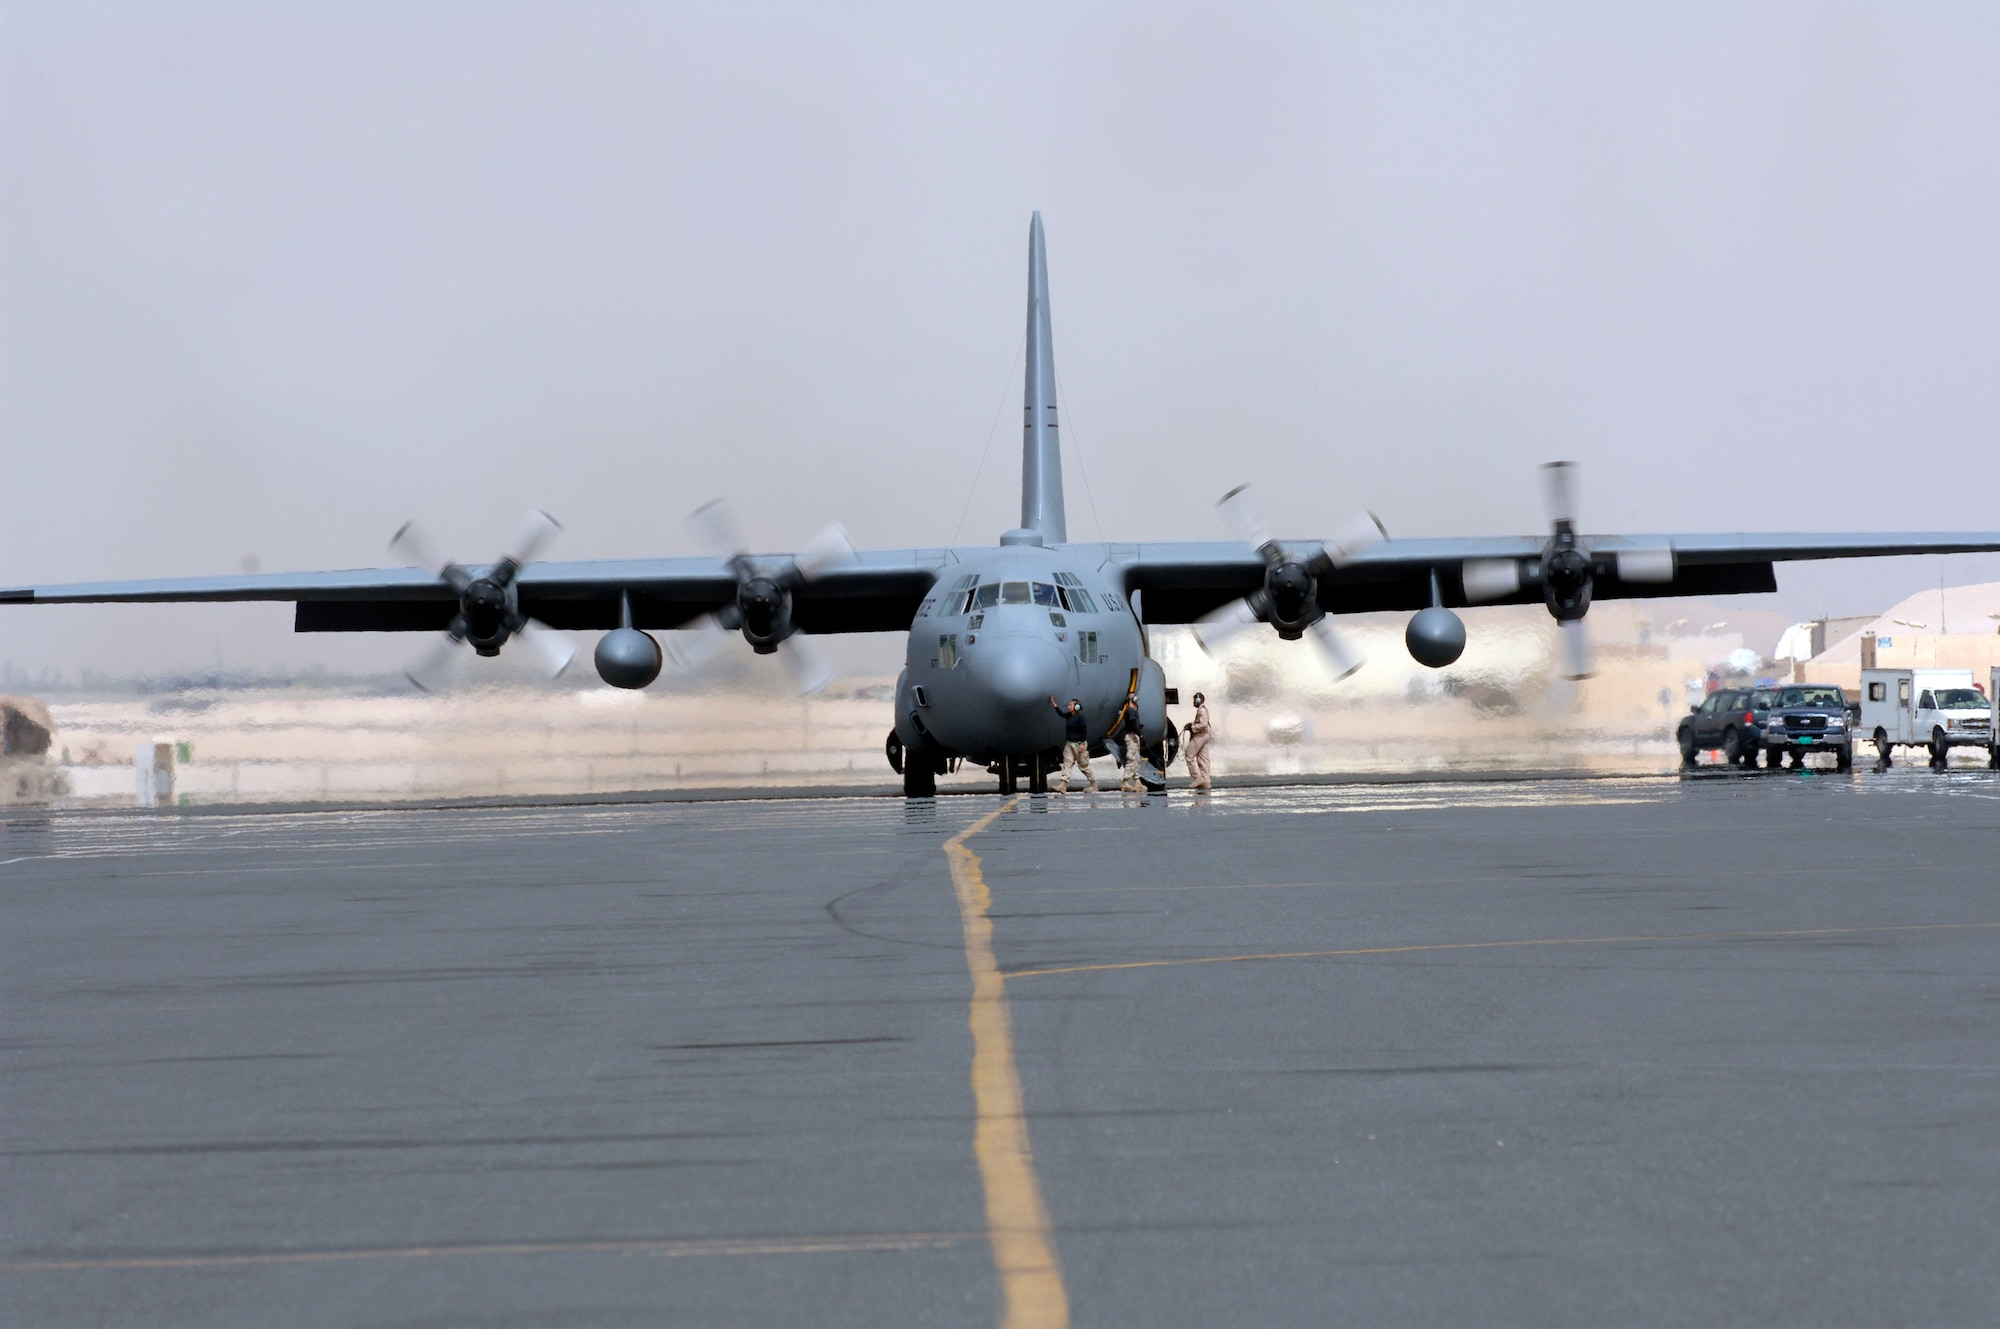 Ground crews prepare a C-130 Hercules for take off before a recent mission. The C-130 is assigned to the 746th Expeditionary Airlift Squadron. Every week, the 746th EAS contributes to the 379th Air Expeditionary Wing delivering more than 1,500 tons of cargo to forward deployed locations. They also transport hundreds of servicemembers in support of operations in Iraq, Afghanistan and the Horn of Africa. (U.S. Air Force/Staff Sgt. David Miller)